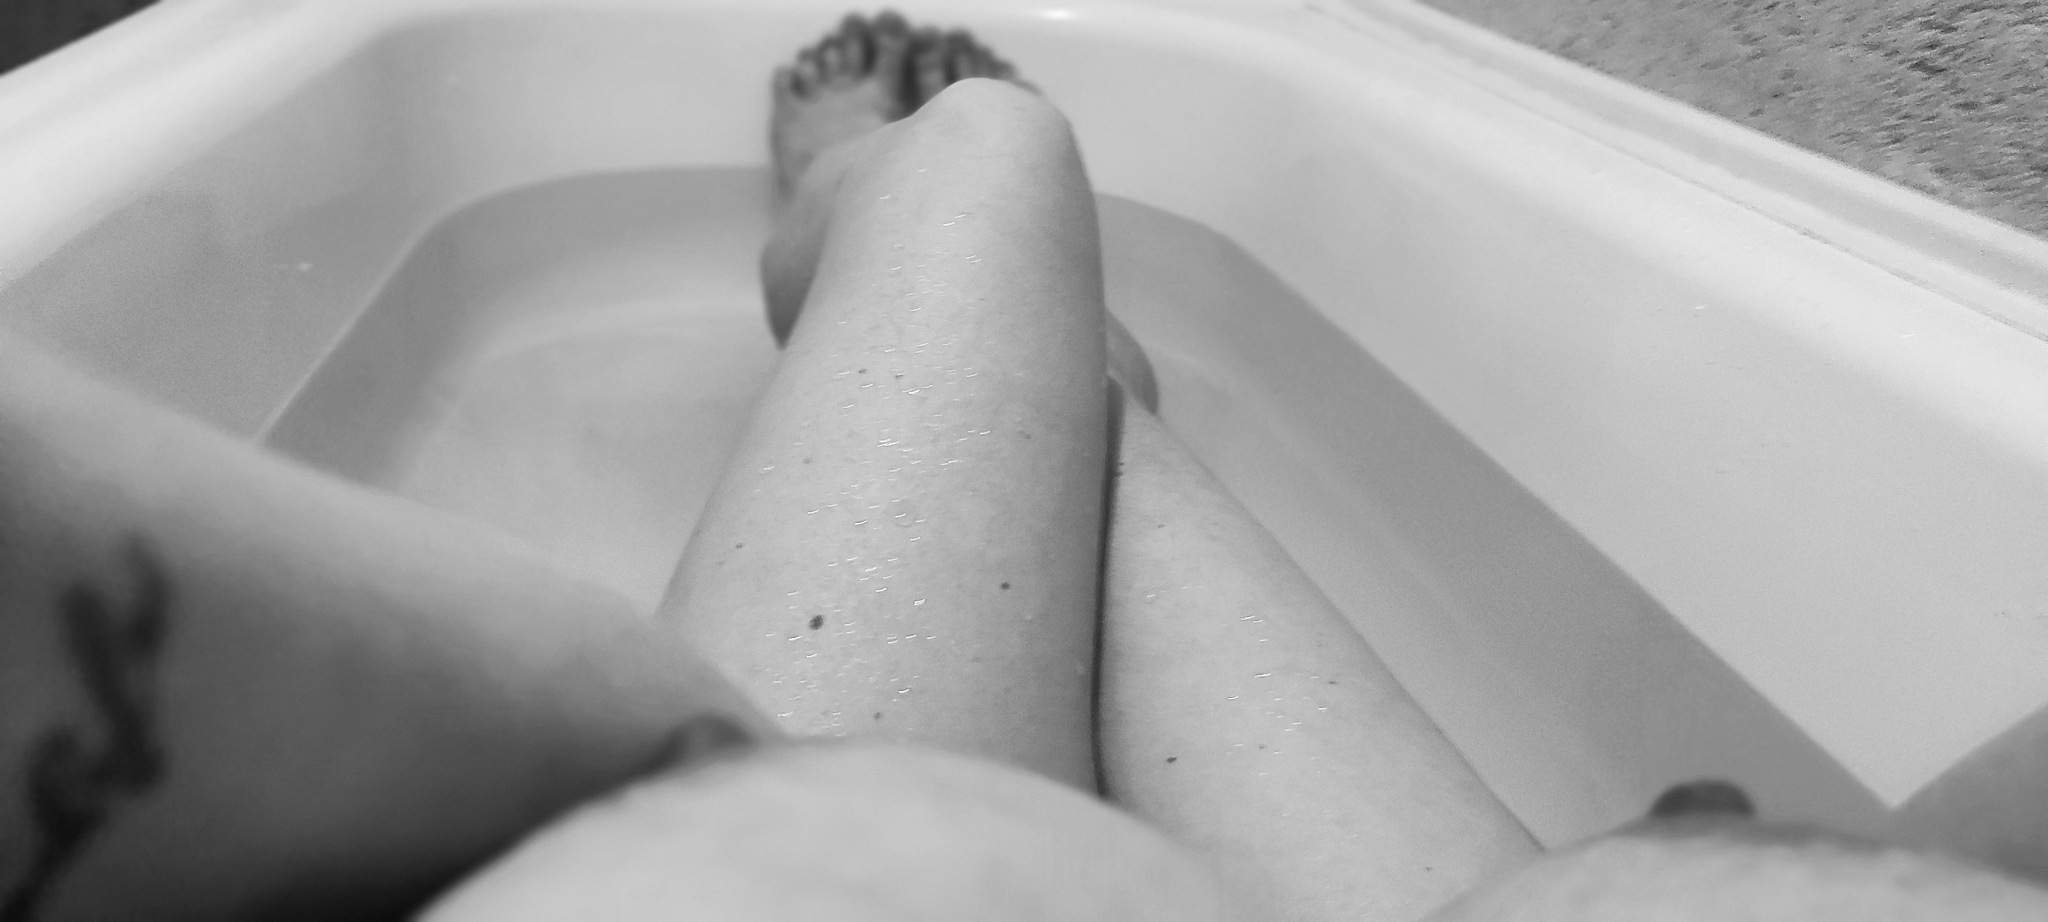 Photodefloration ... - NSFW, My, Homemade, Bath, First time, Longpost, Boobs, Foot fetish, No face